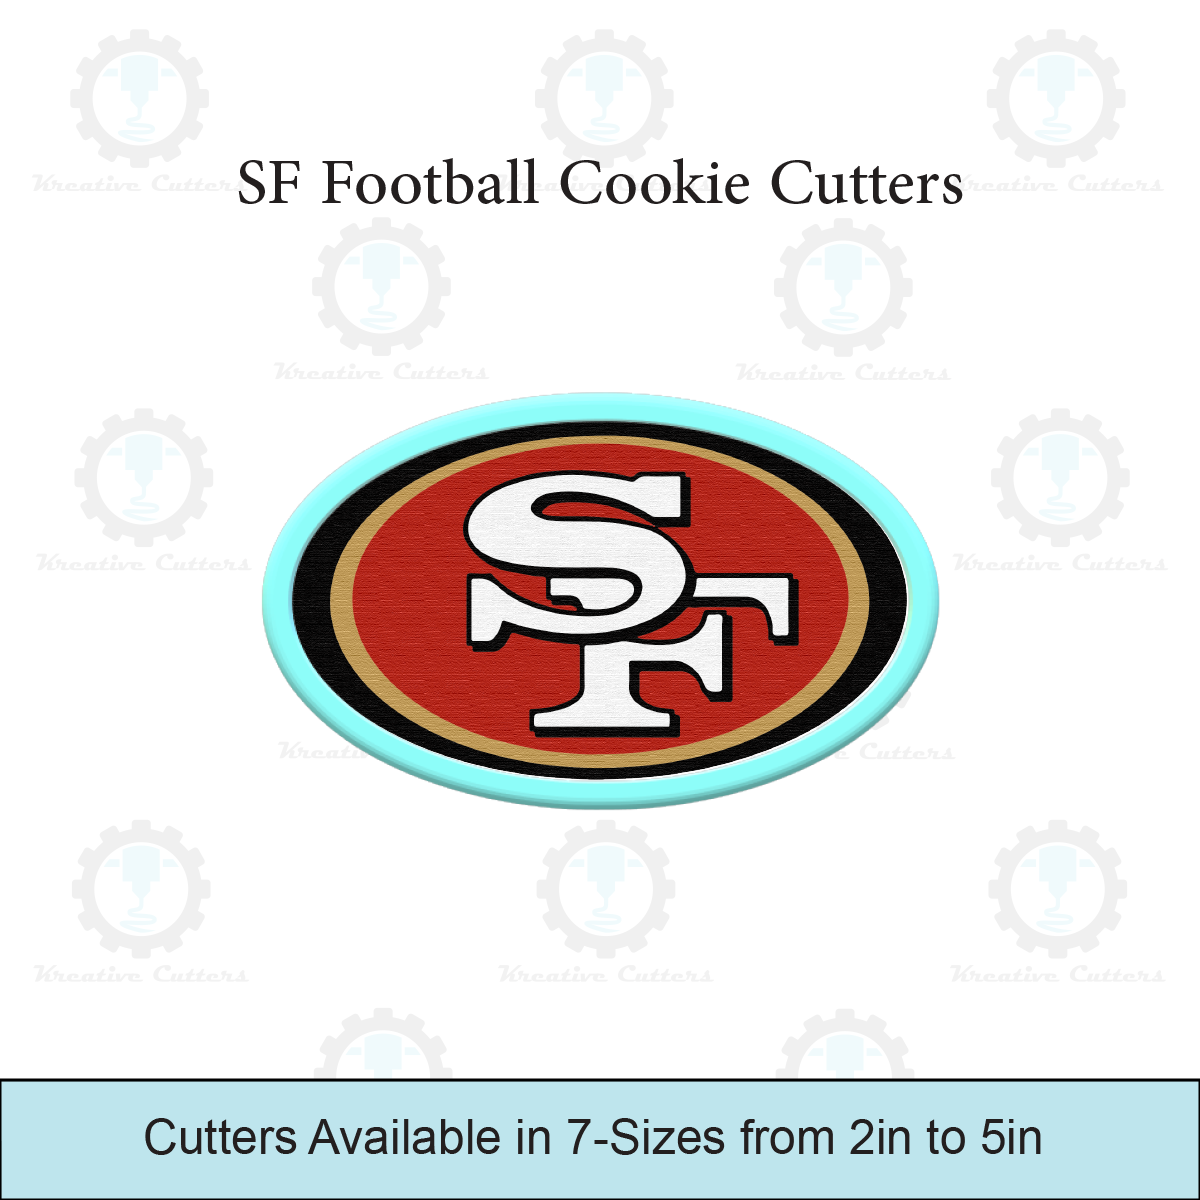 SF Football Cookie Cutters